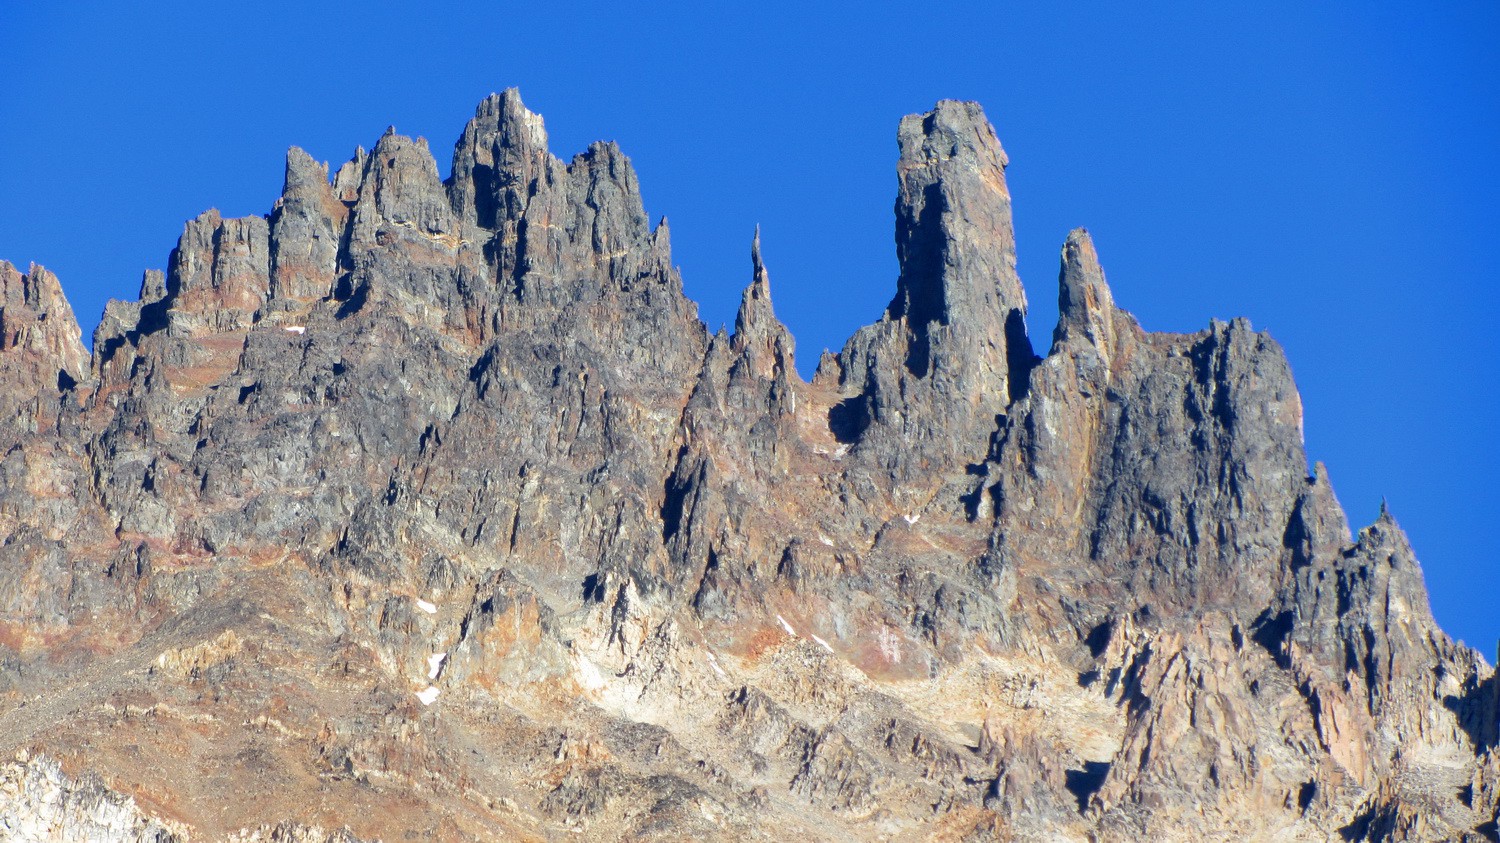 Incredible tall pinnacle (in the center)